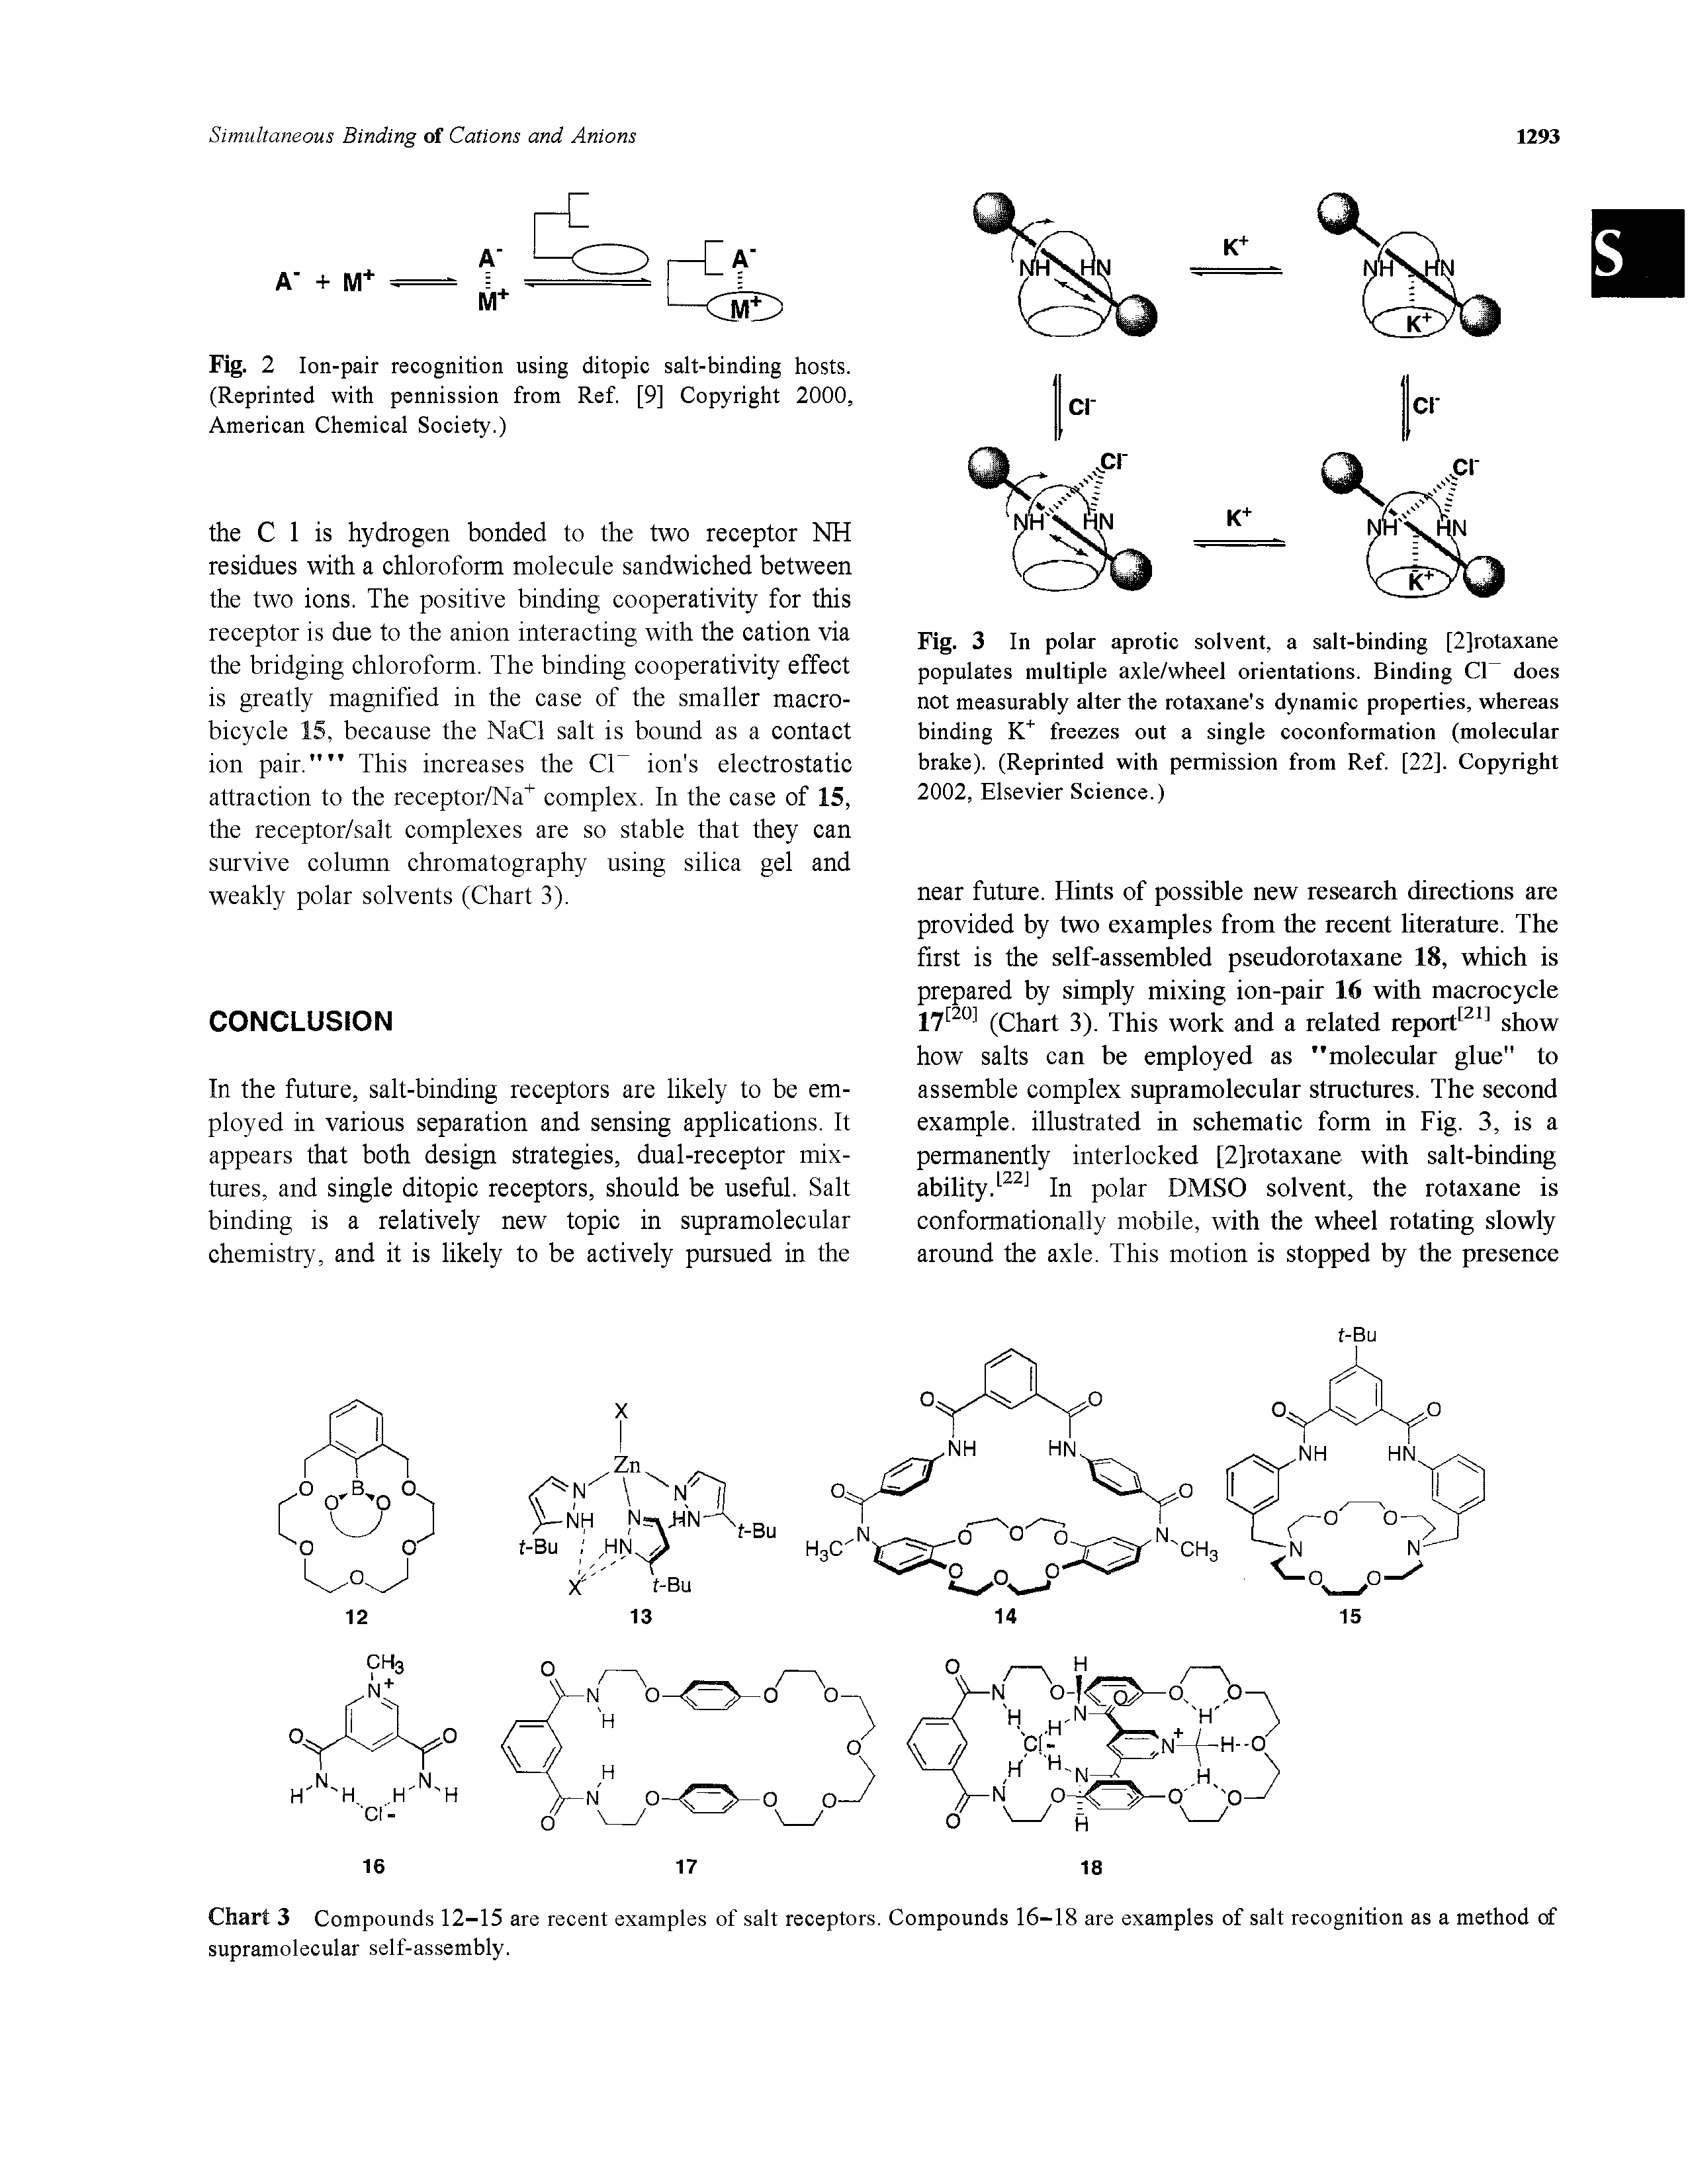 Fig. 3 In polar aprotic solvent, a salt-binding [2]rotaxane populates multiple axle/wheel orientations. Binding CP does not measurably alter the rotaxane s dynamic properties, whereas binding K " freezes out a single coconformation (molecular brake). (Reprinted with pennission from Ref. [22]. Copyright 2002, Elsevier Science.)...